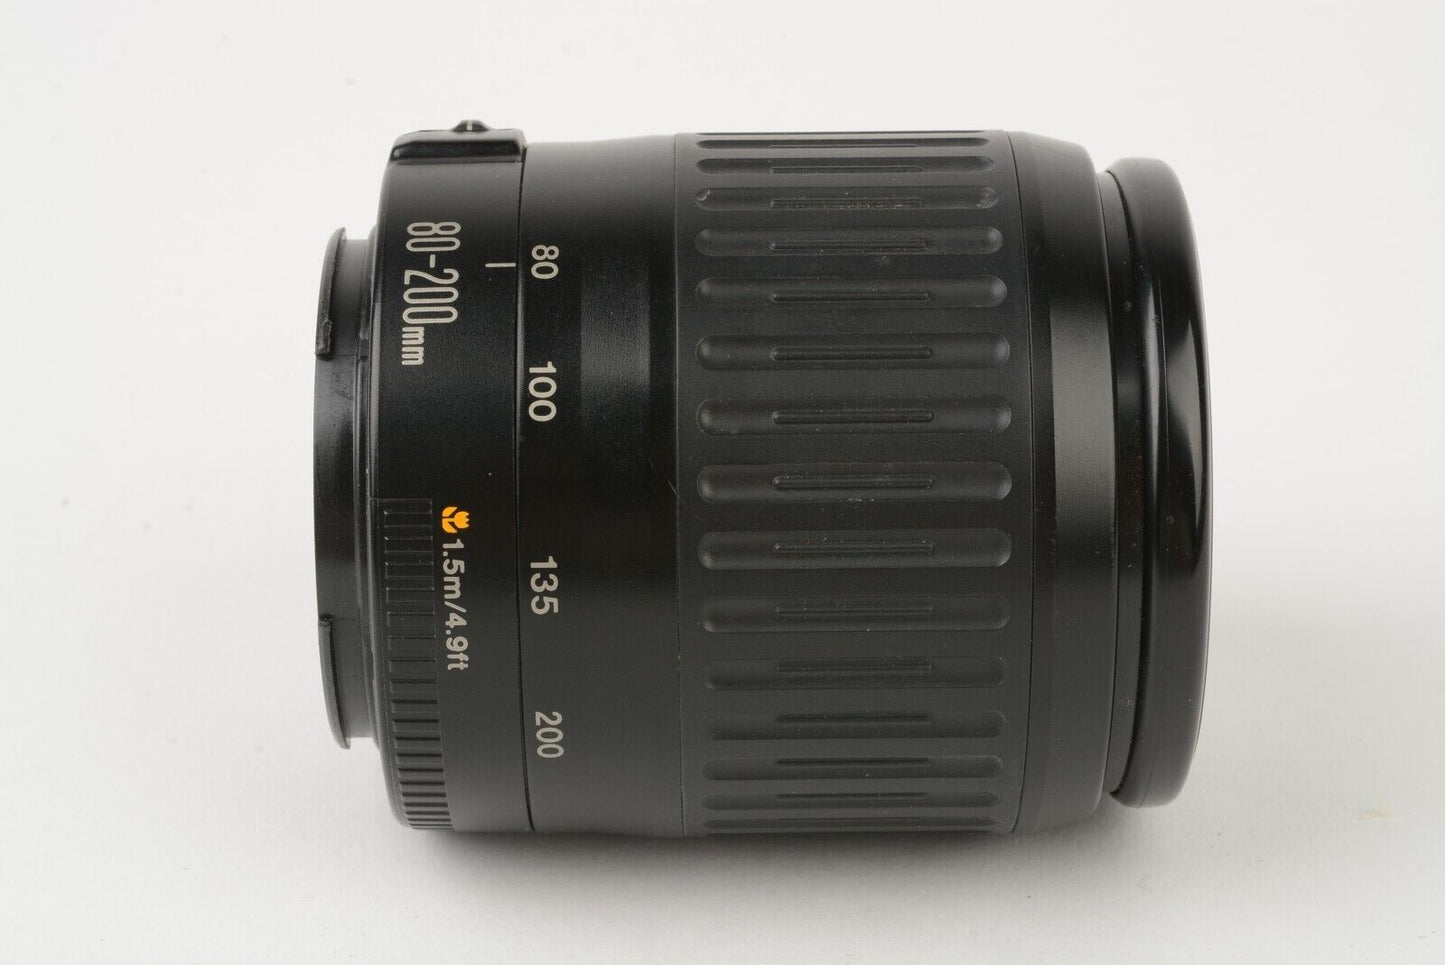 EXC++ CANON EF 80-200mm f4-5.6 TELEPHOTO ZOOM LENS, CLEAN, SHARP +CAPS